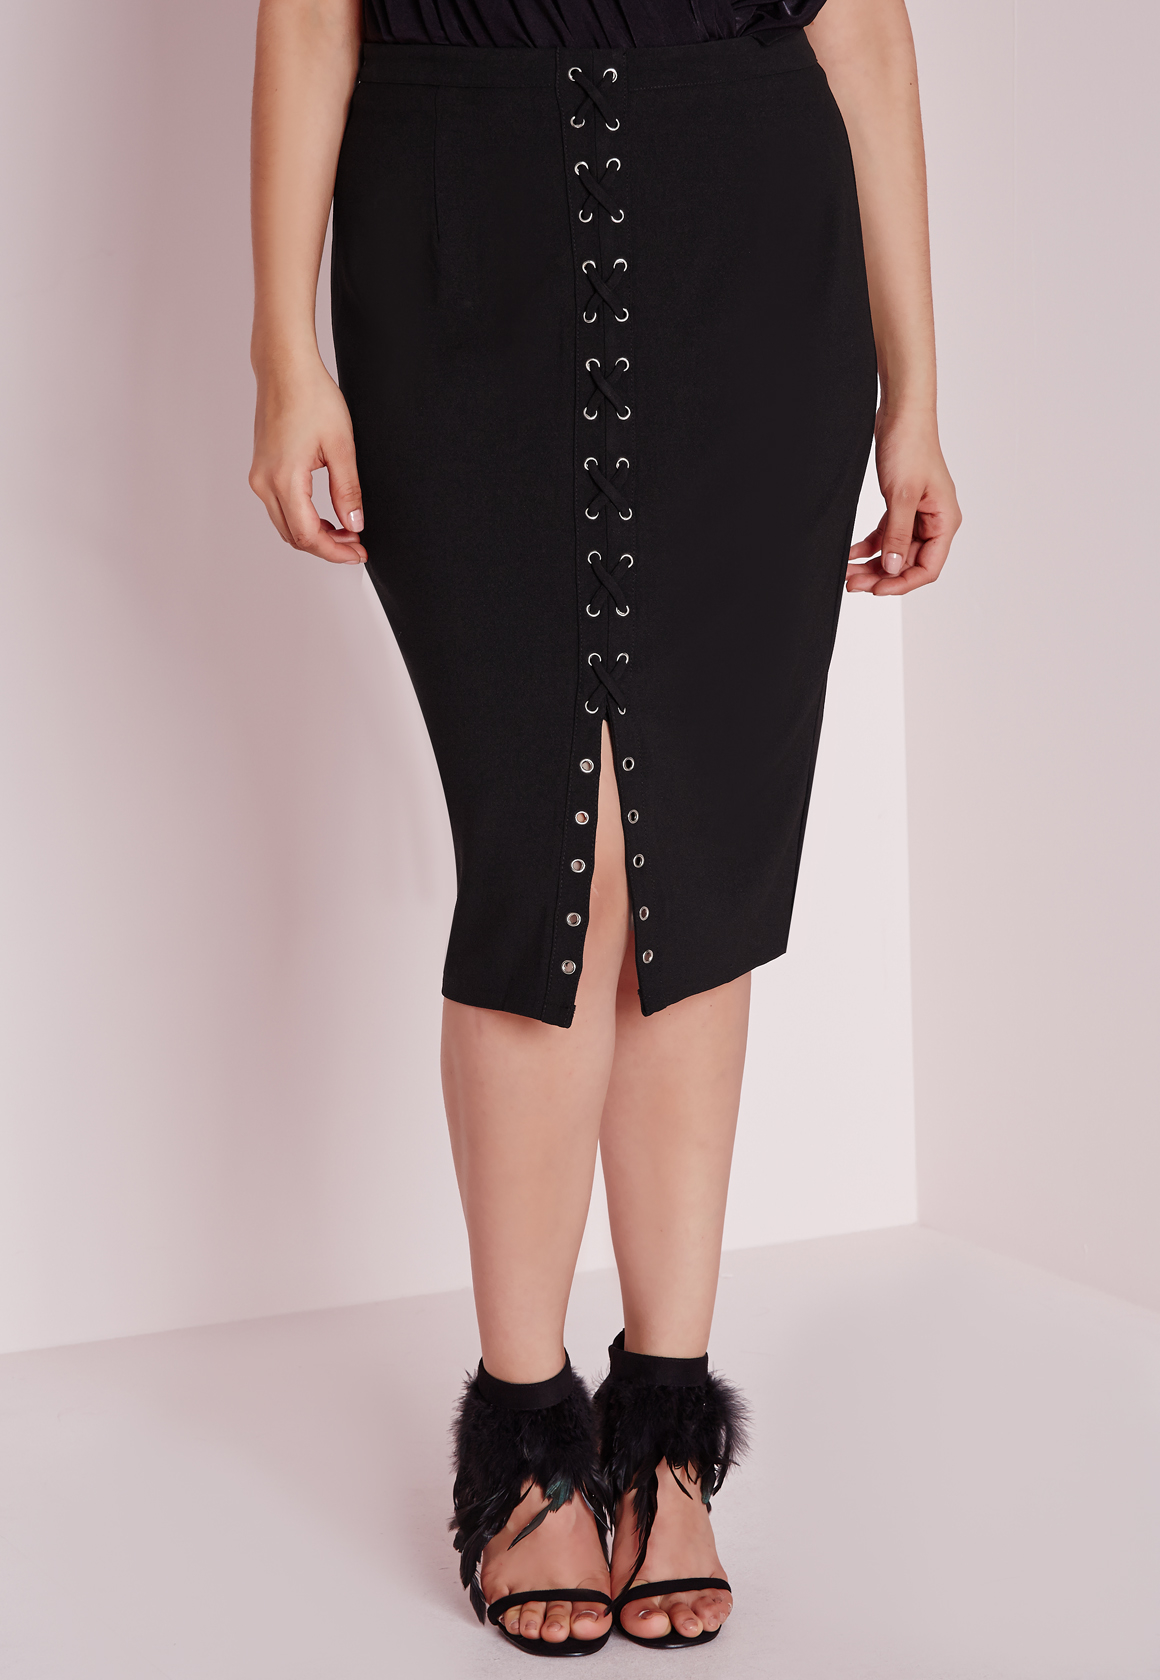 Lyst - Missguided Plus Size Lace Up Midi Skirt Black in Black